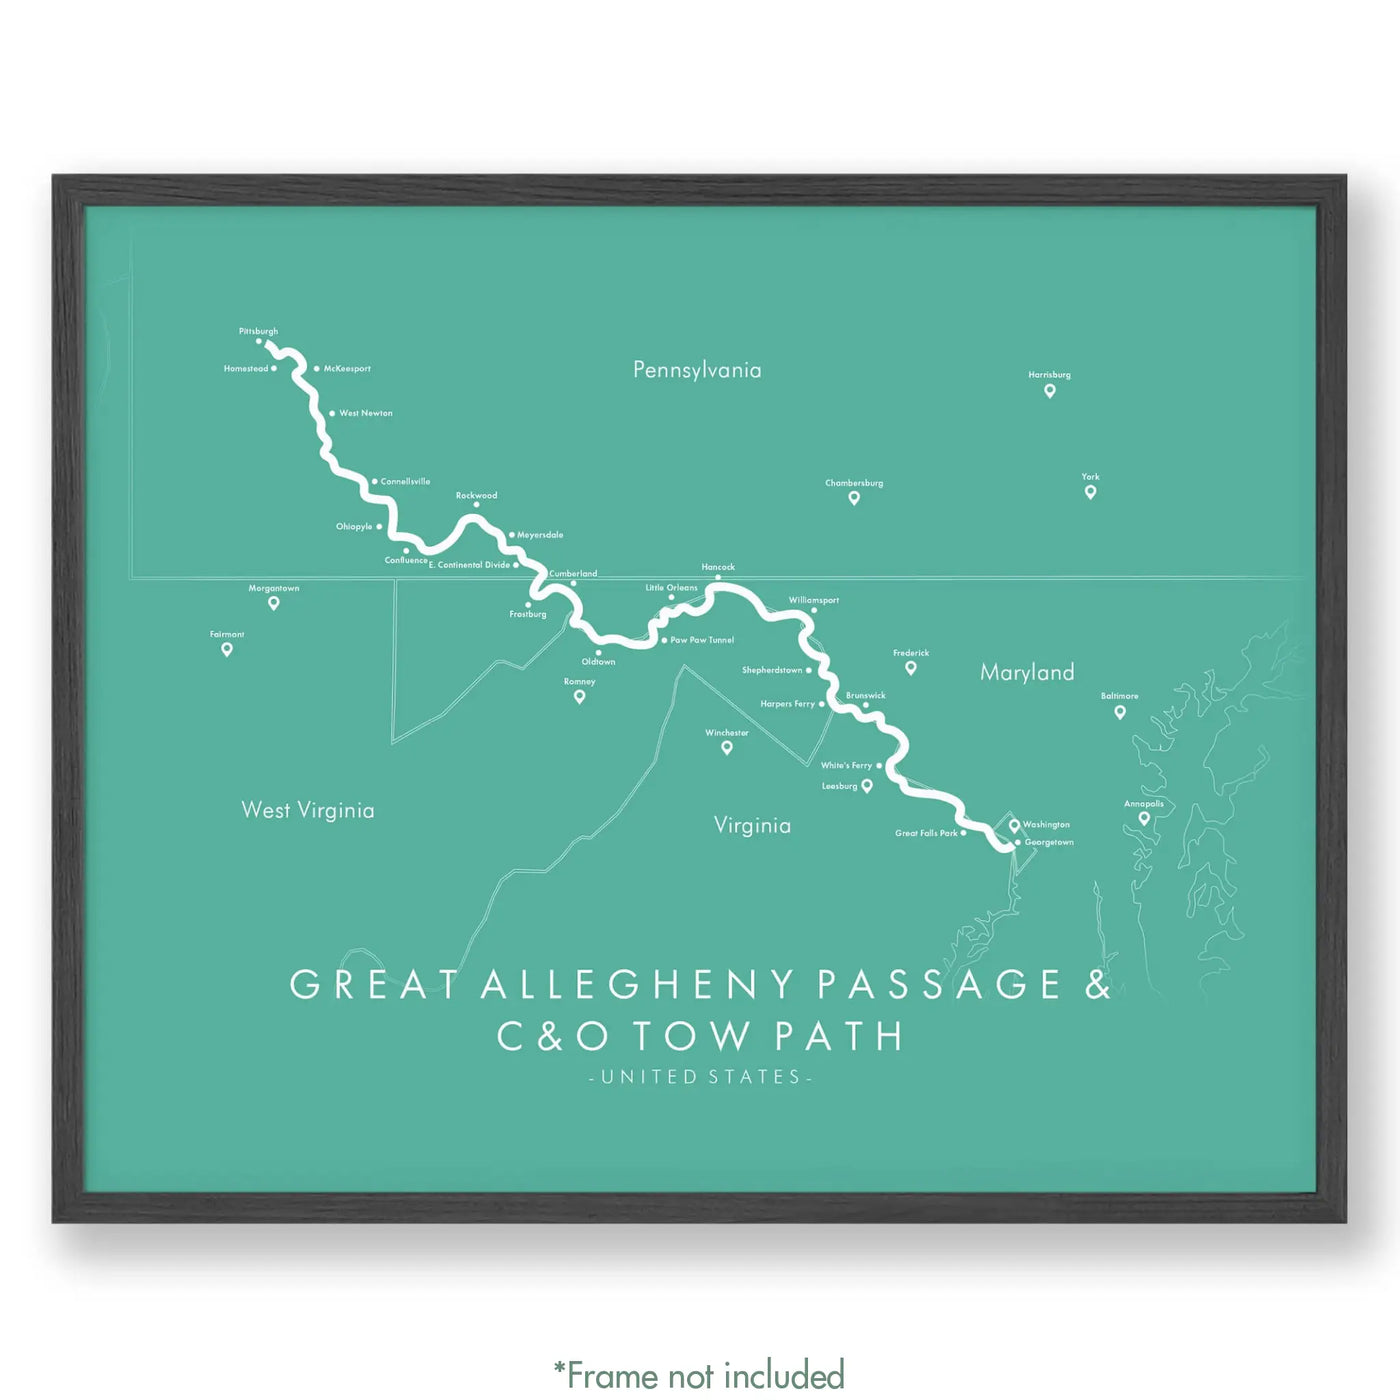 Trail Poster of Great Allegheny Passage & C&O Tow Path - Teal